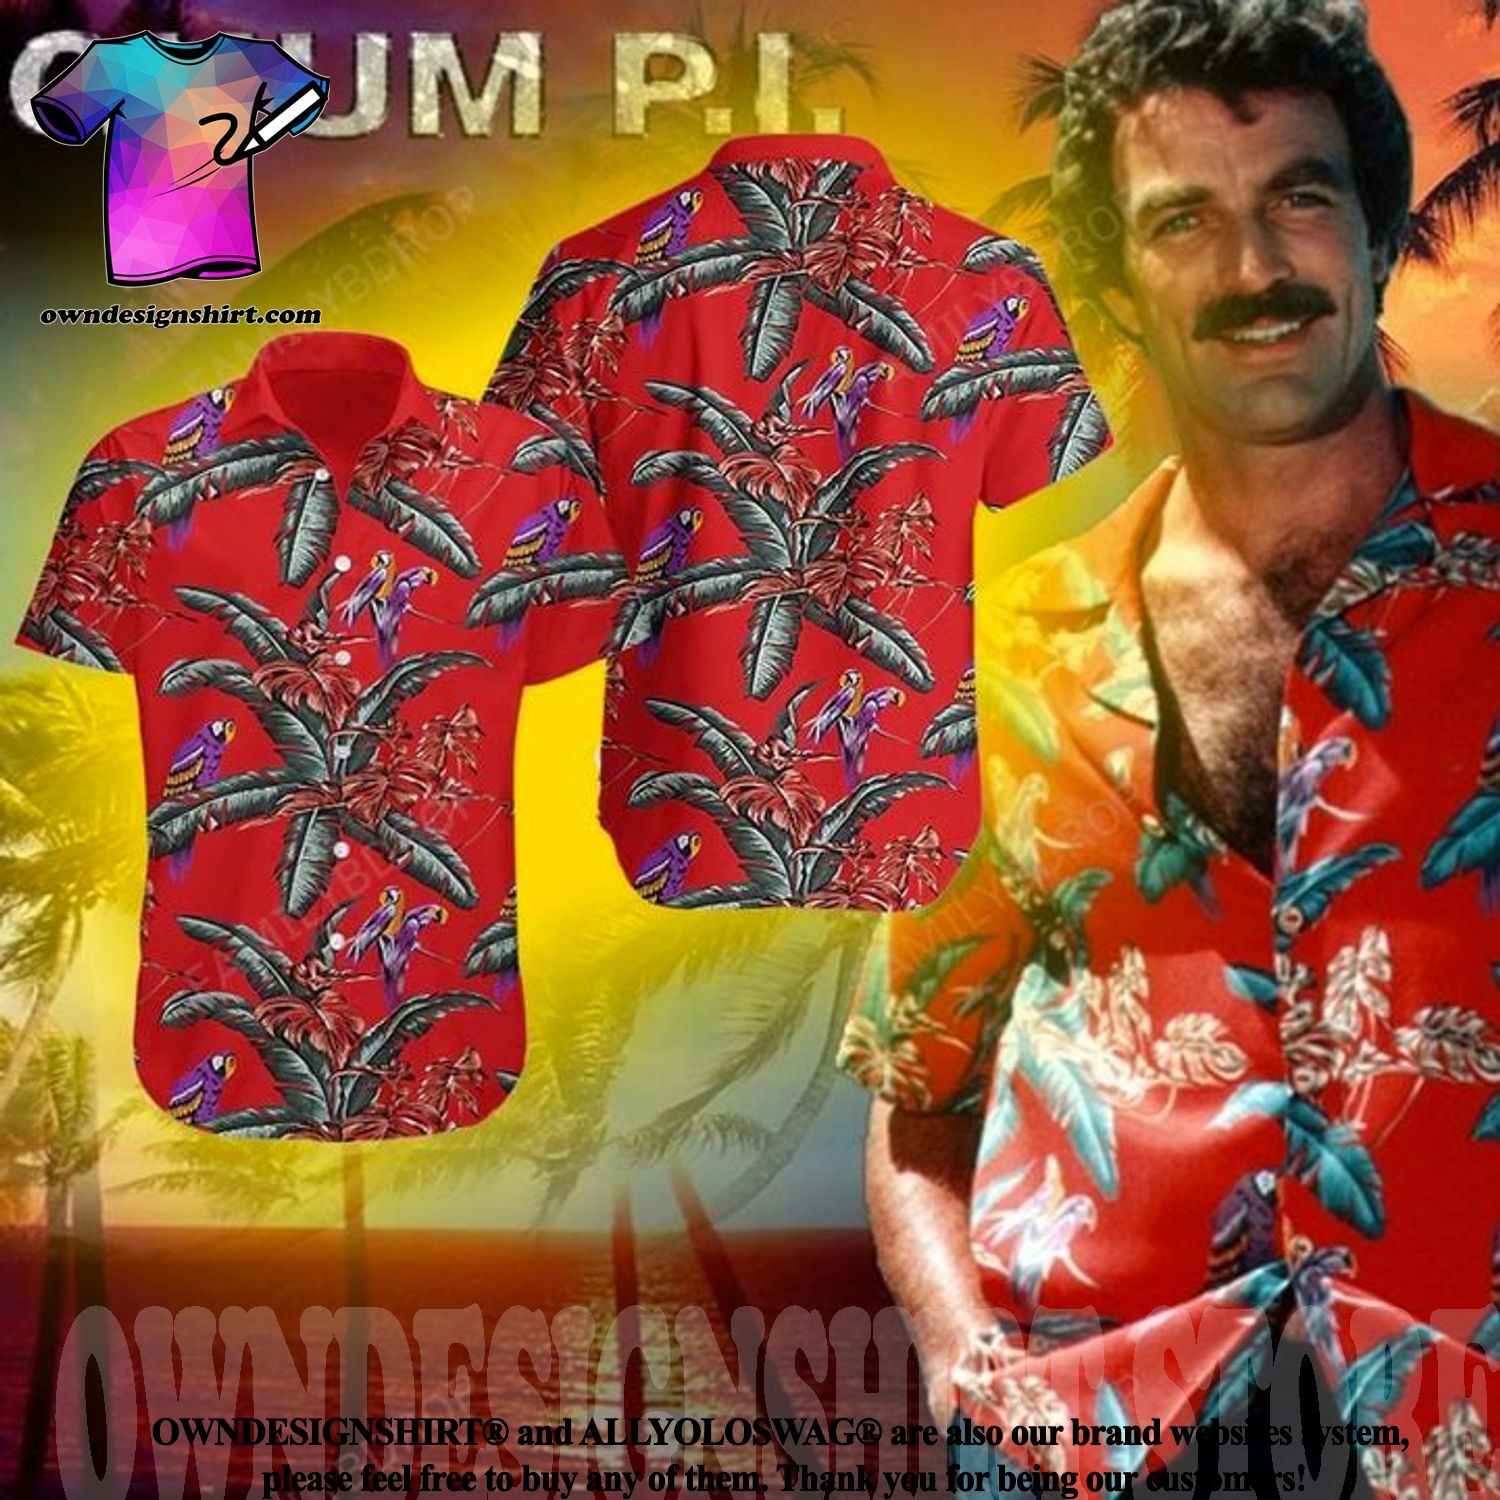 [The best selling] Thomas Magnum Tom Selleck In Magnum Ver 1 Summer ...